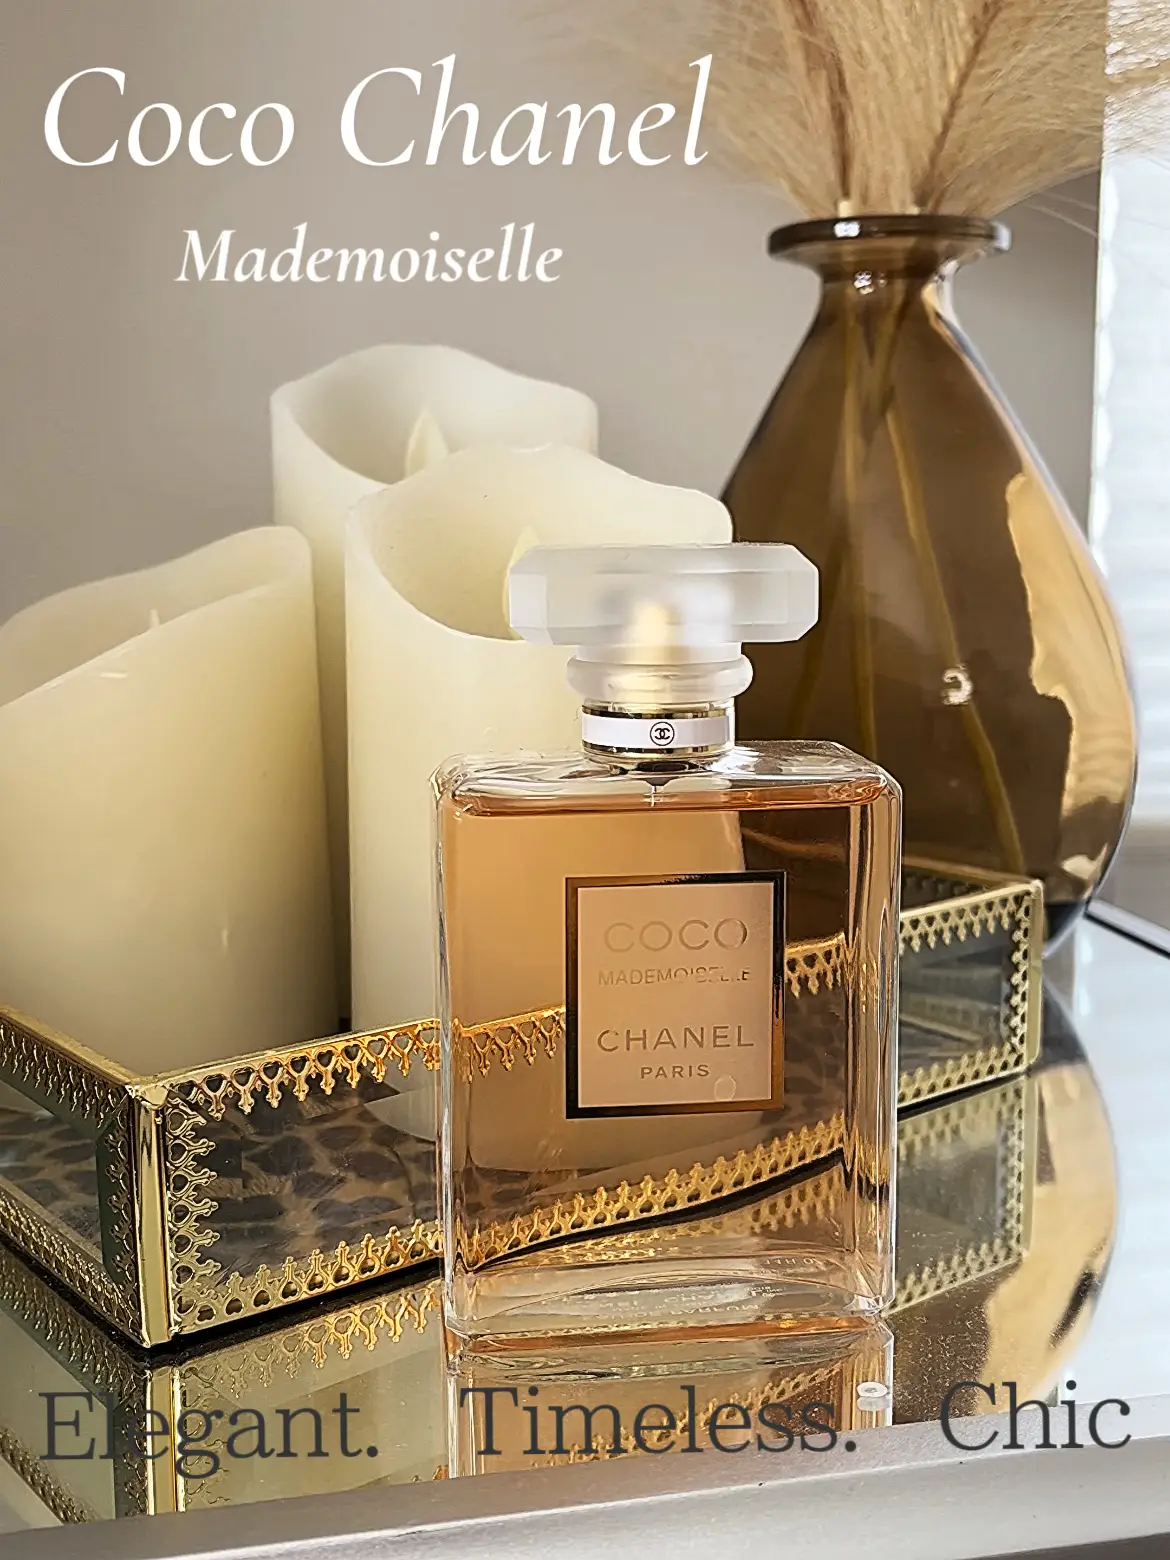 Coco Chanel Mademoiselle, Gallery posted by Amandas World